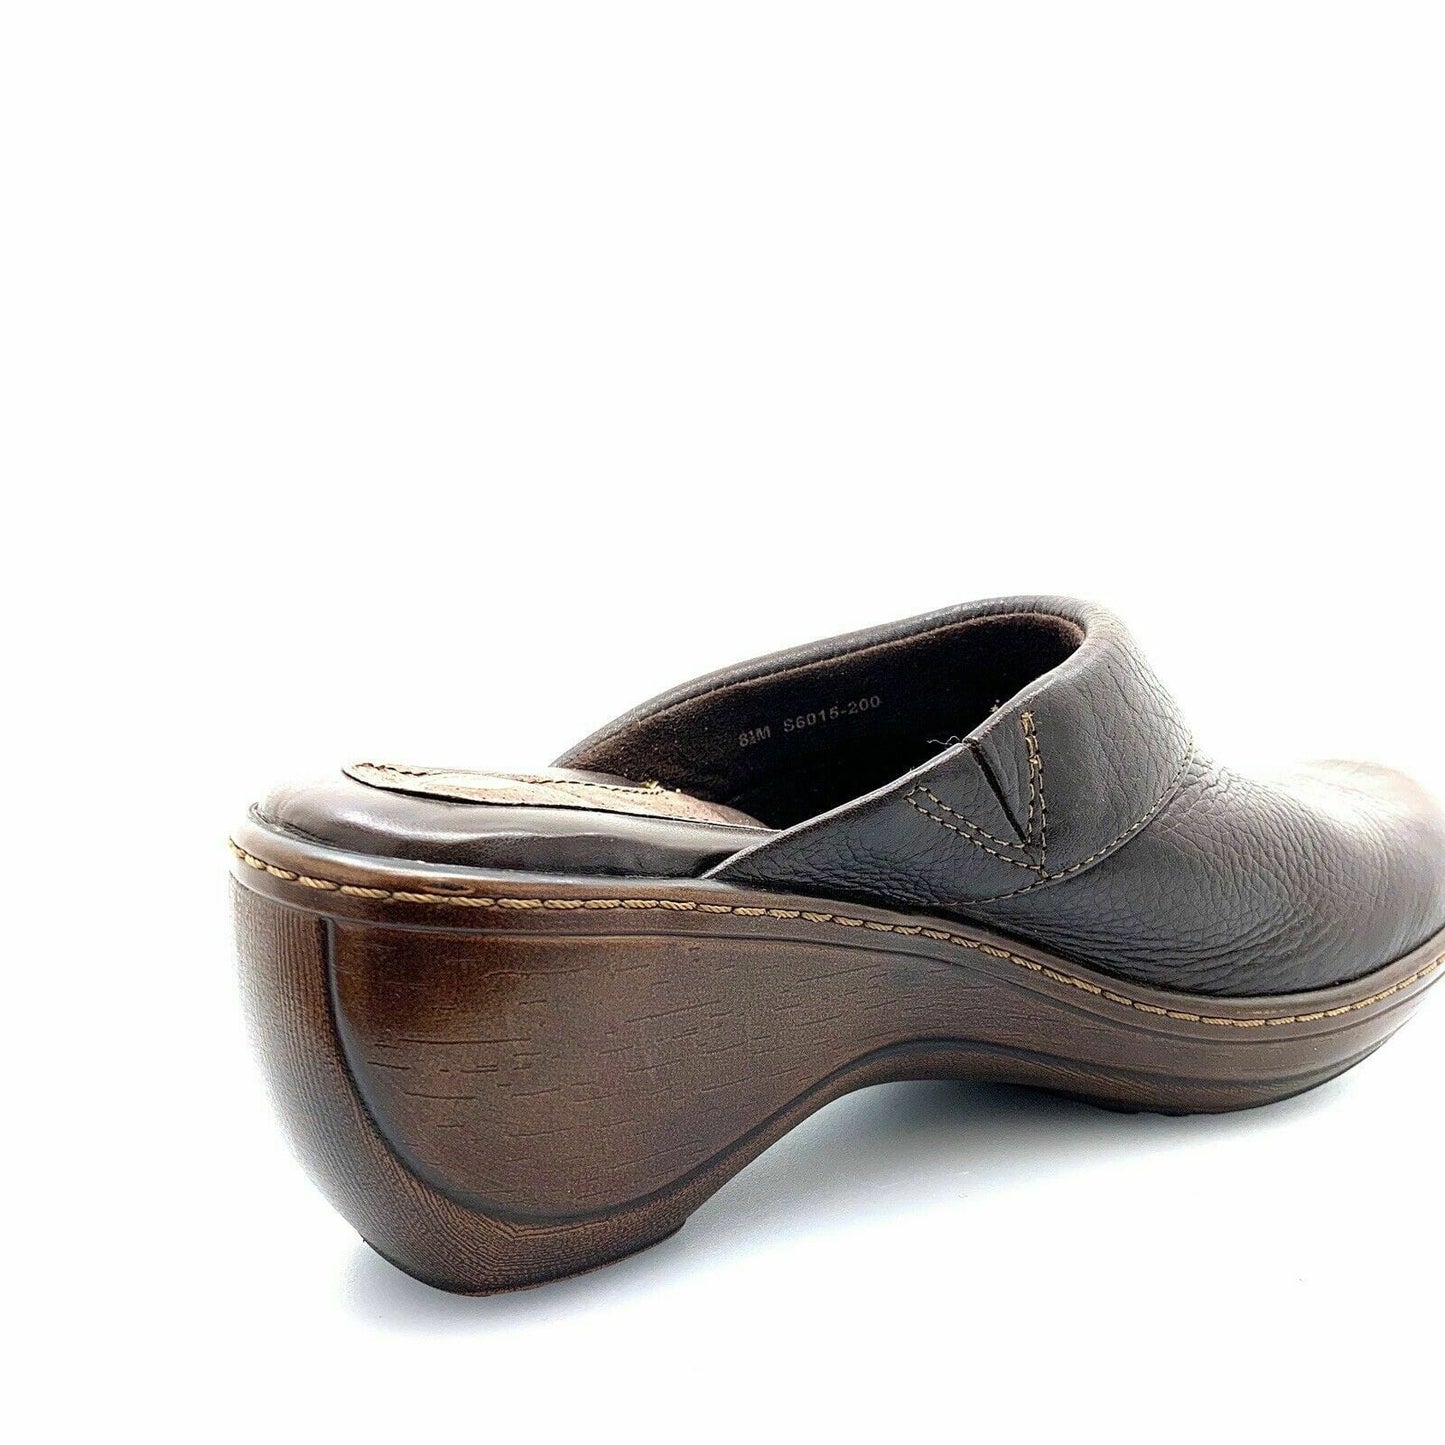 Soft Walk Womens Murietta Leather Comfort Shoes Clogs, Brown - Size 8.5M